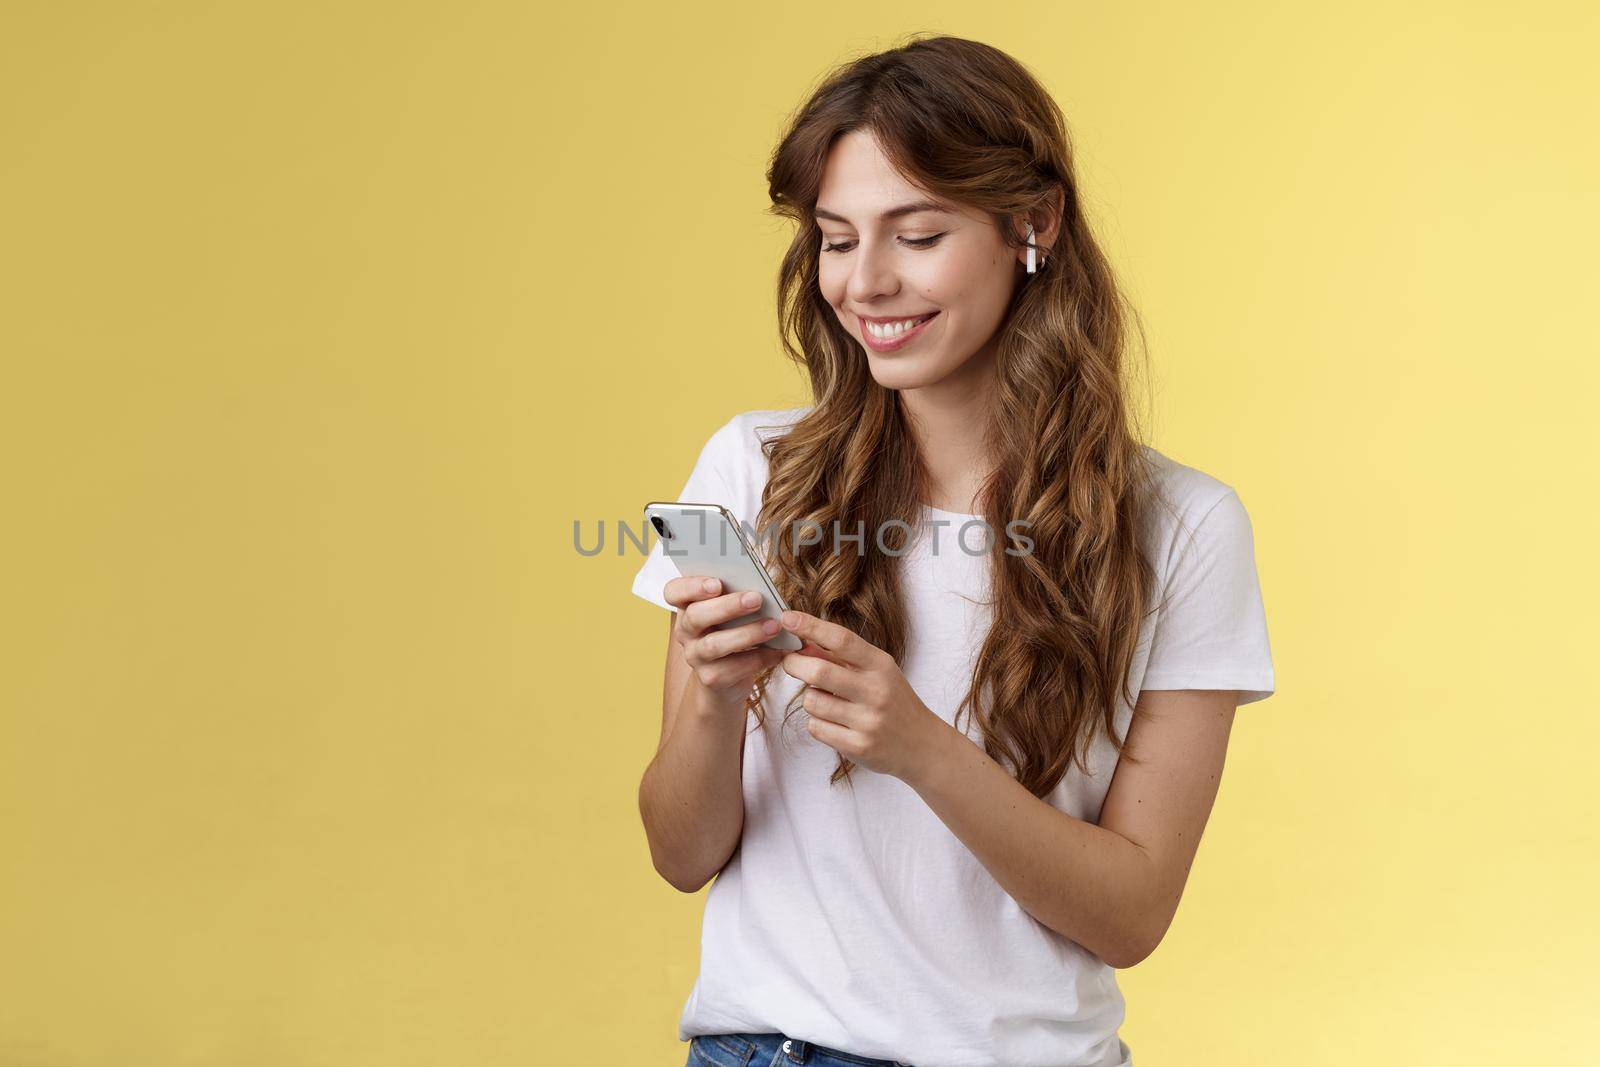 Happy caring tender feminine girlfriend curly long hair hold smartphone picking song listen way home smiling broadly look mobile phone scroll music platform wear wireless earbud yellow background. Lifestyle.